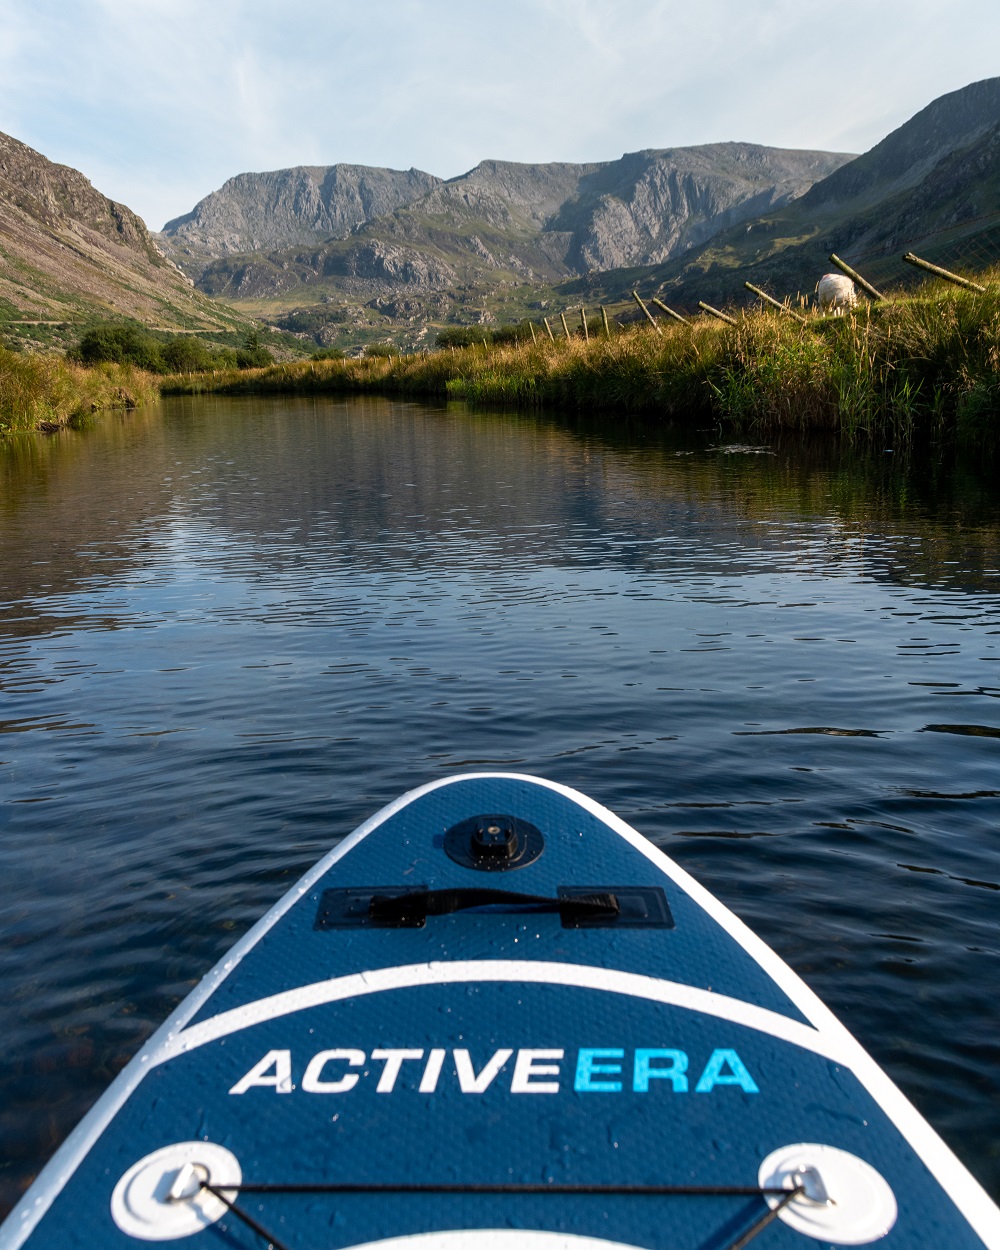 Active Era Paddle Board Review